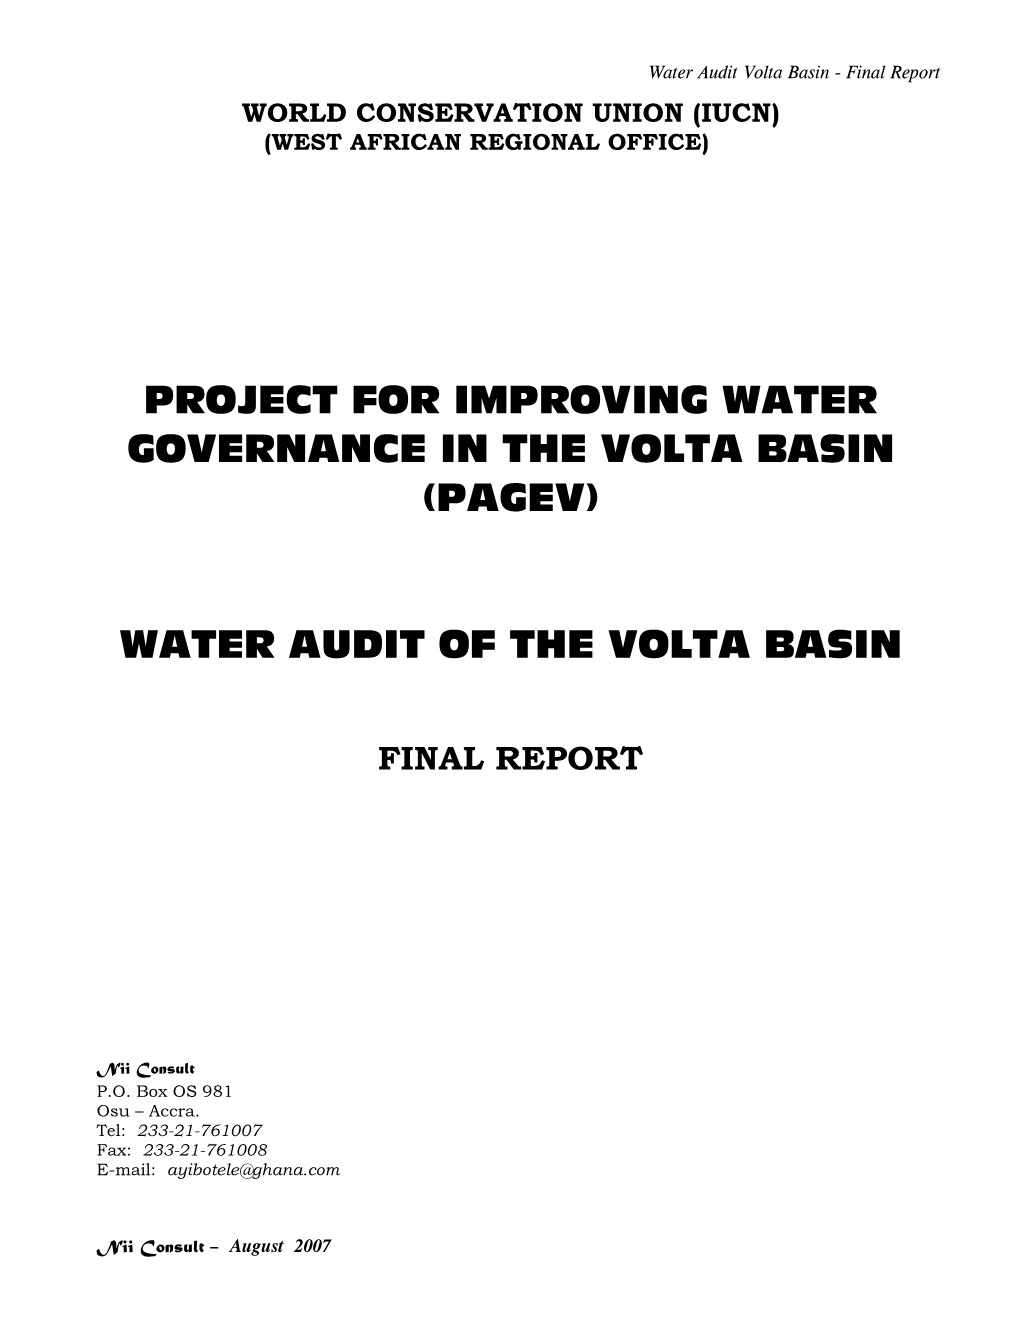 Water Audit of the Volta Basin